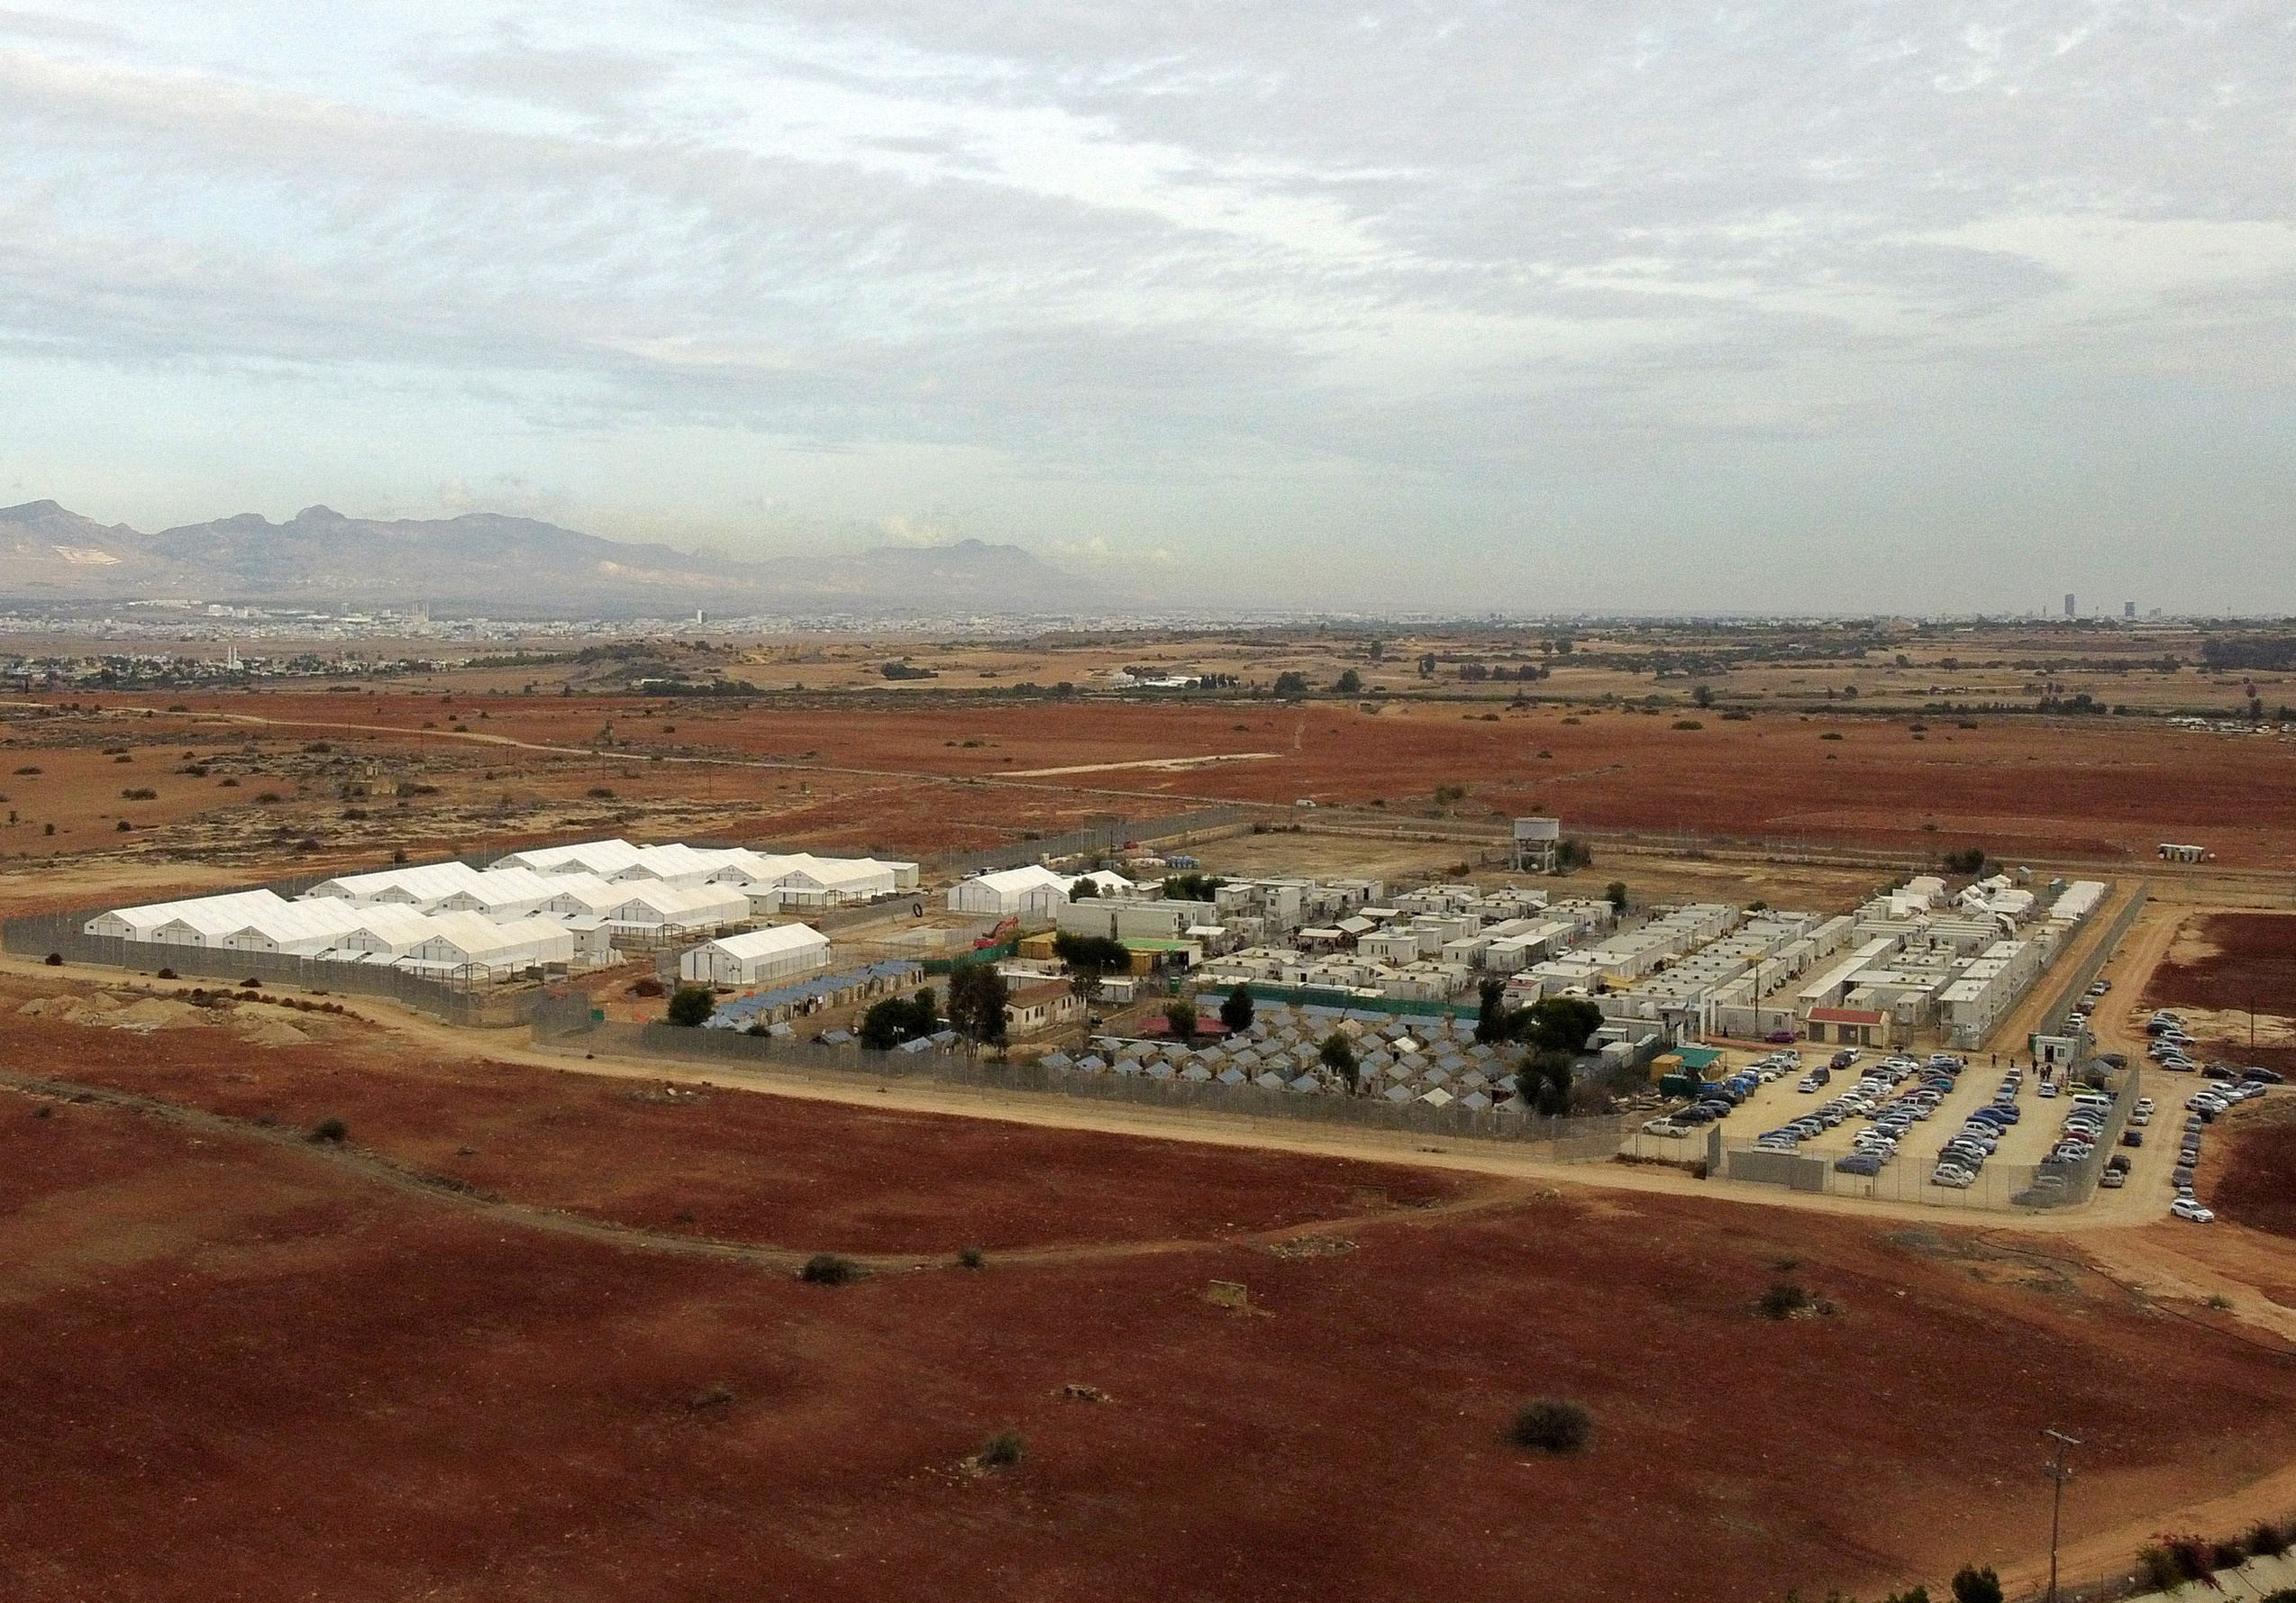 A general view of Pournara refugee camp in Kokkinotrimithia on the outskirts of Nicosia